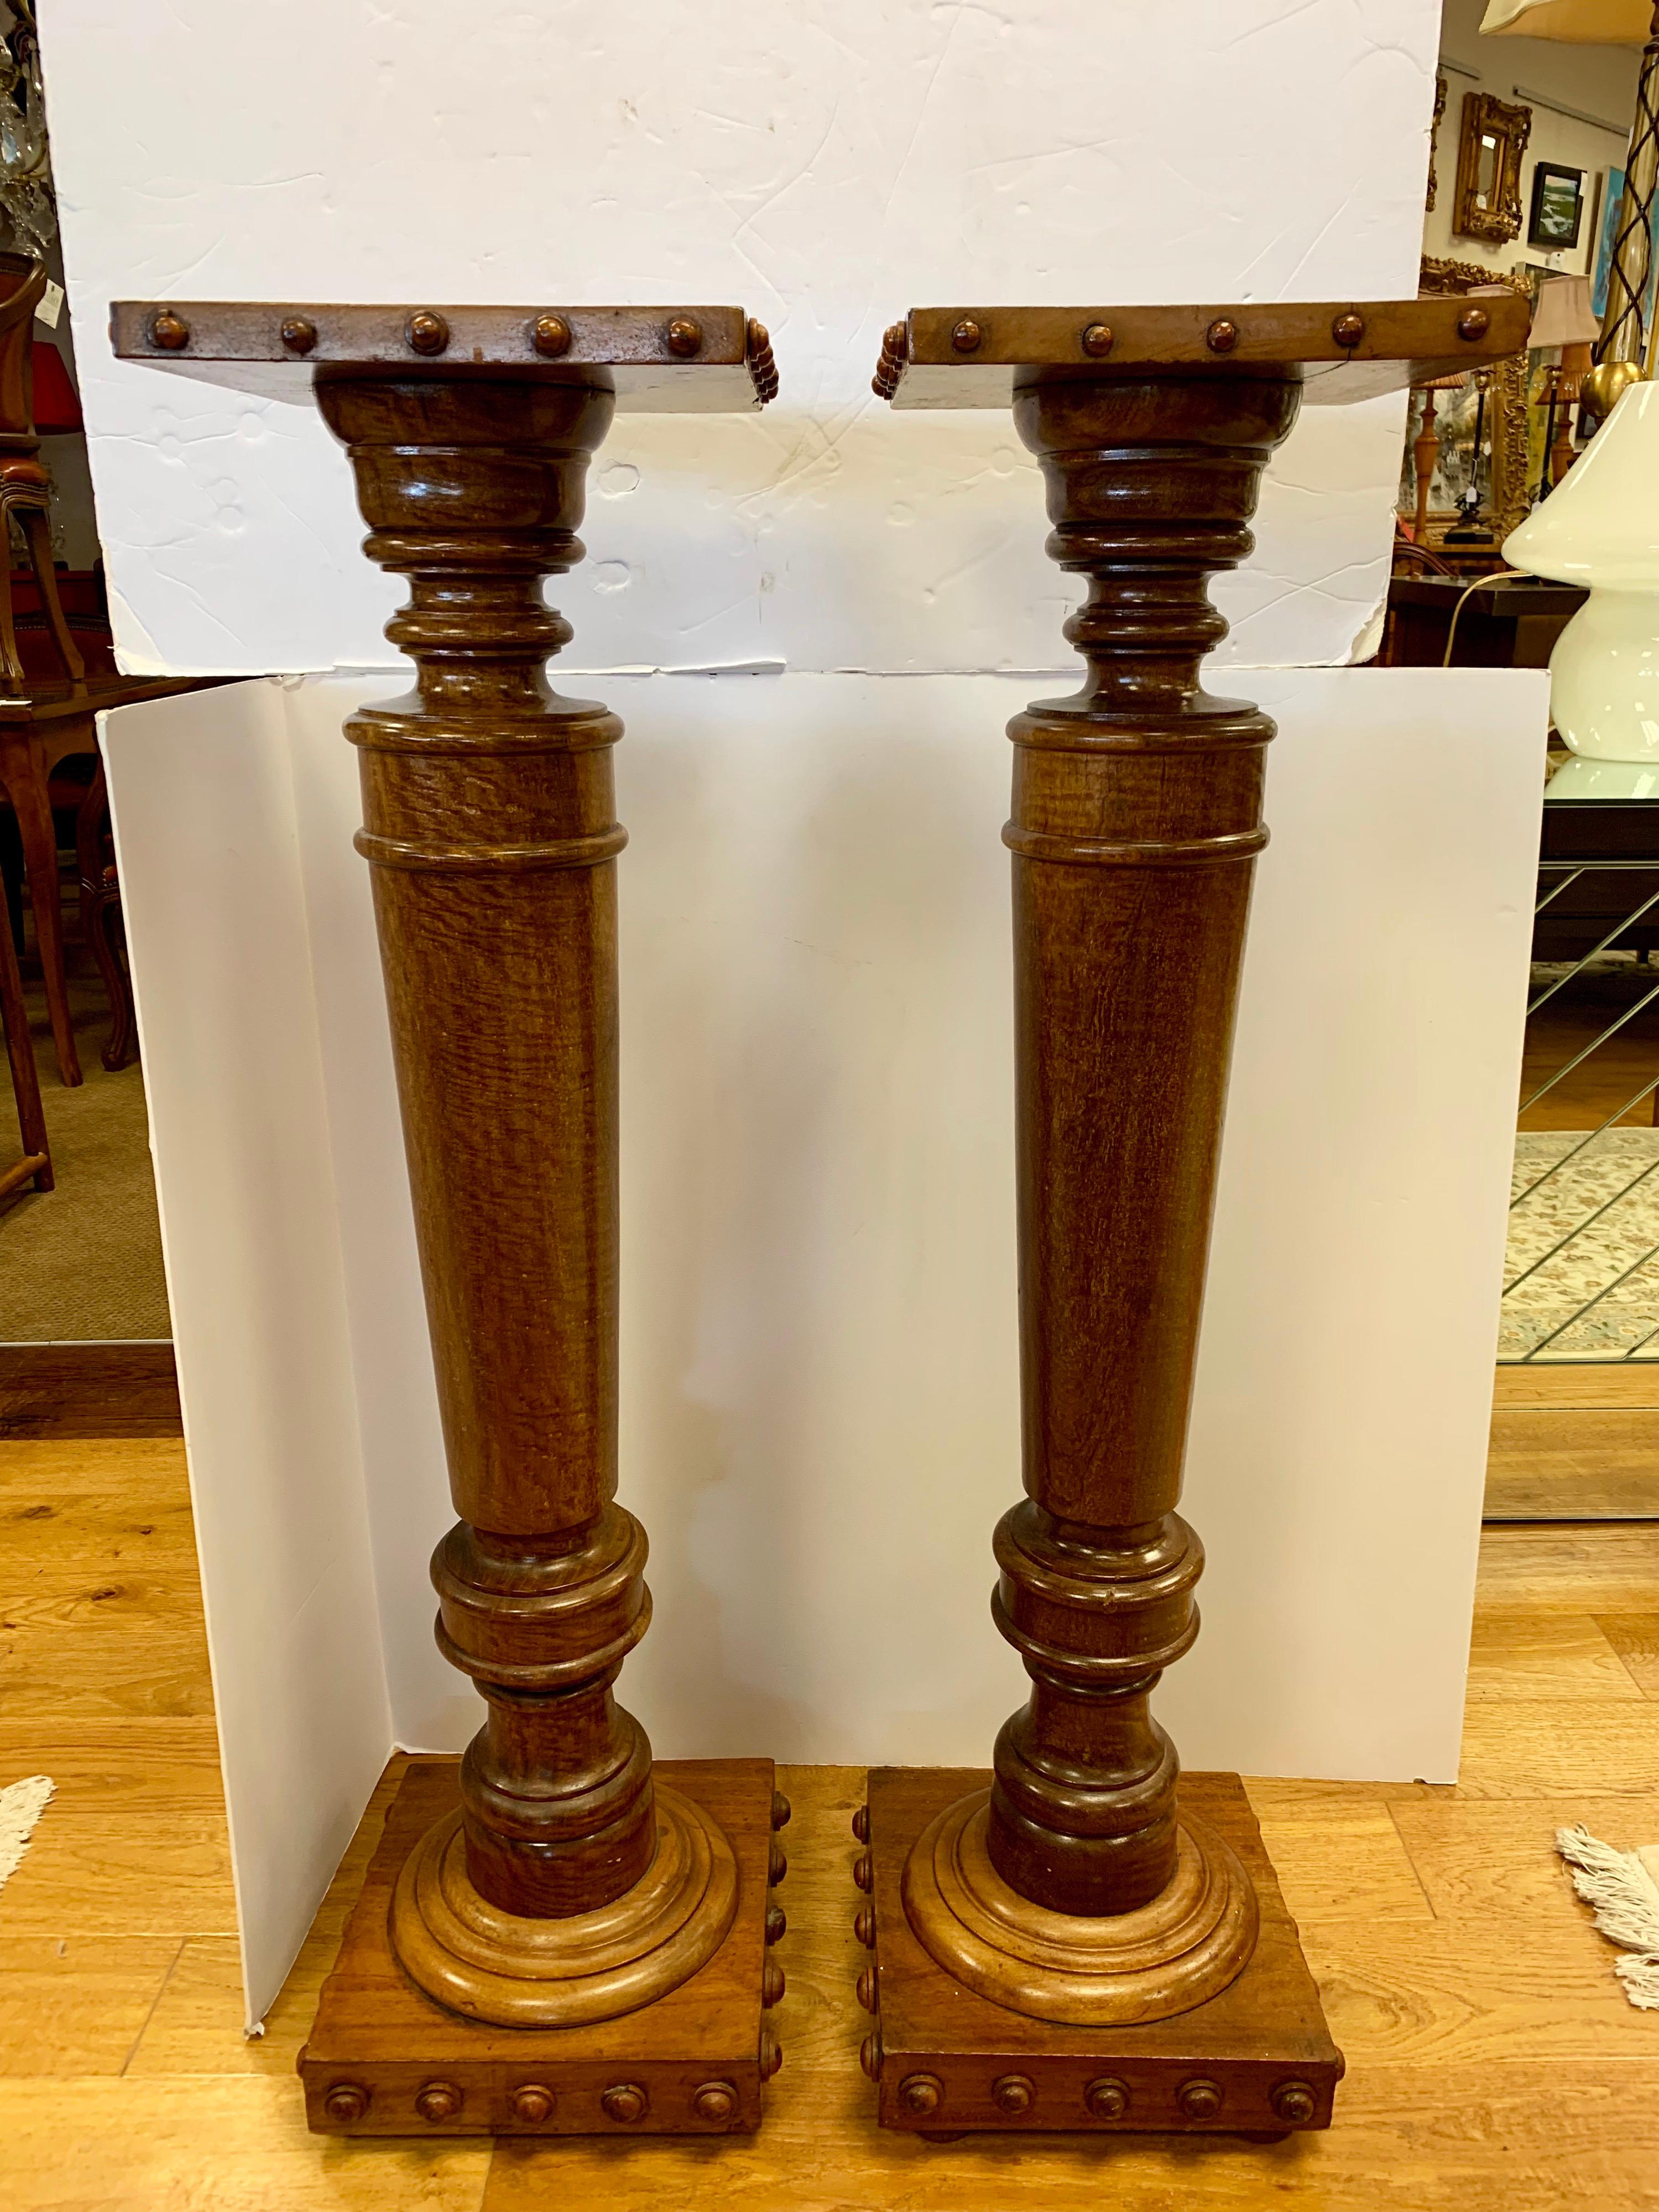 Pair of heavy Regency style mahogany column pedestals, the top is square, supported by tapered columns raised on a block plinth decorated with carved ball accents.